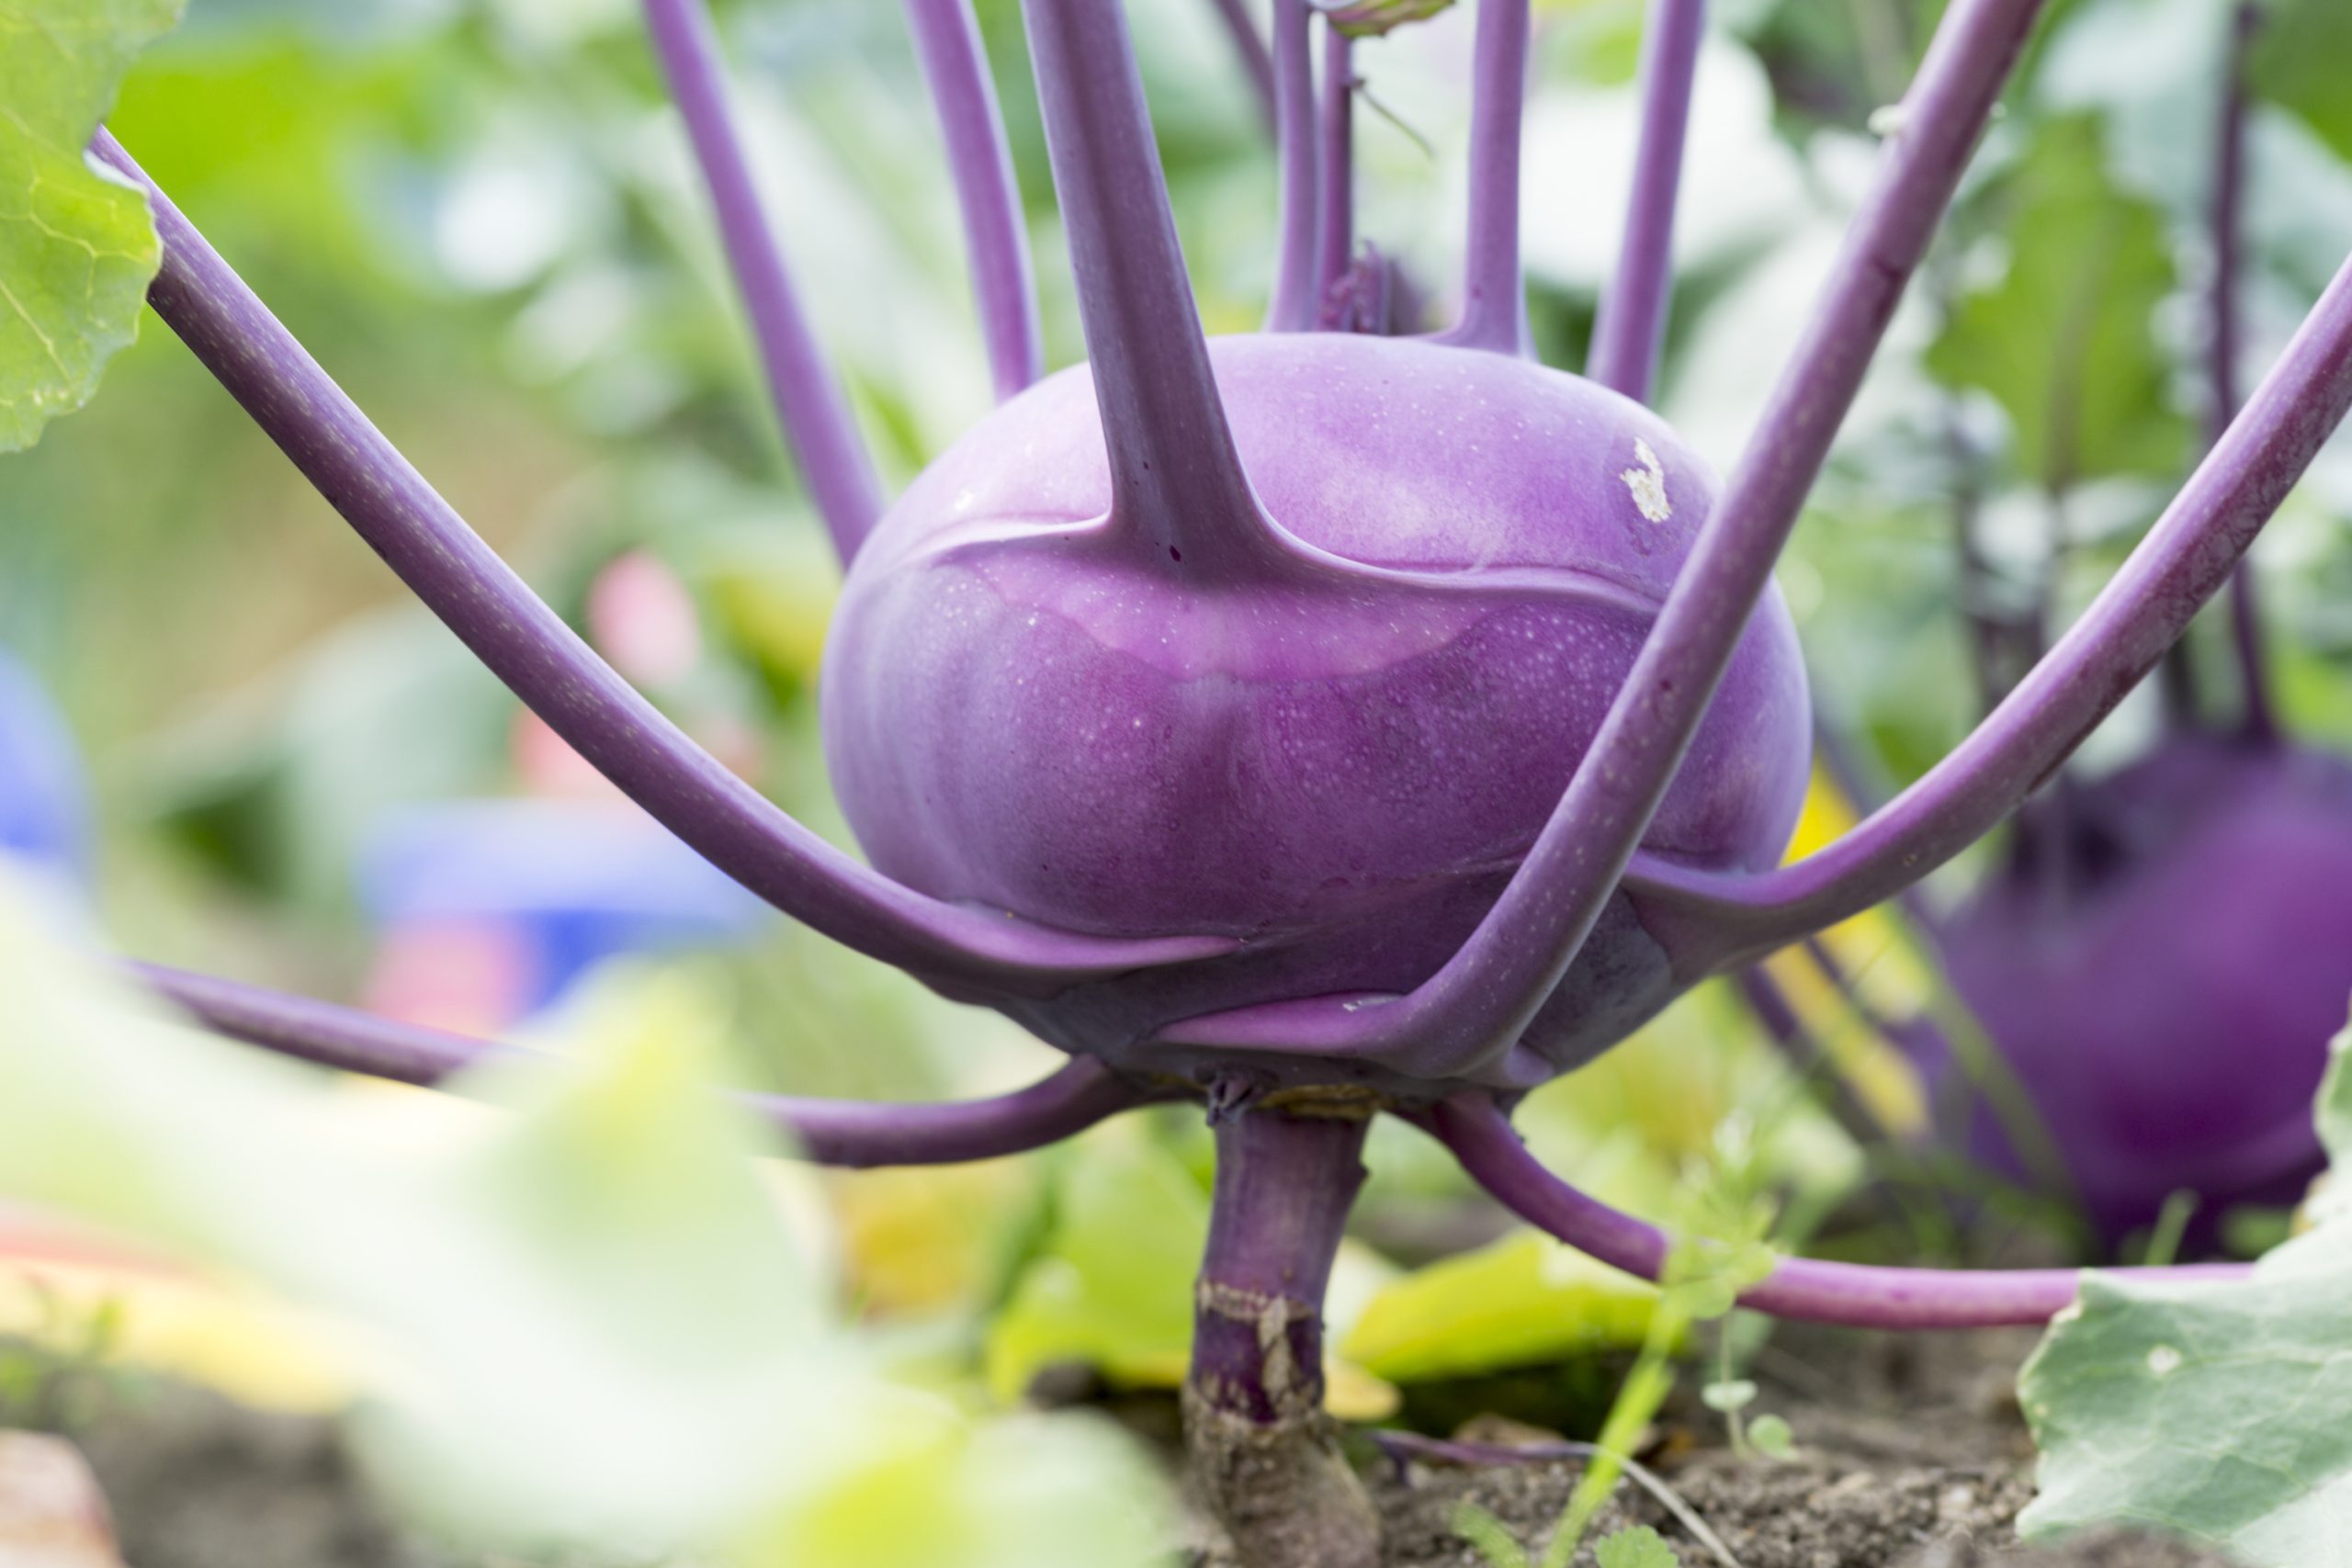 Kohlrabi - What is it and How to Cook It